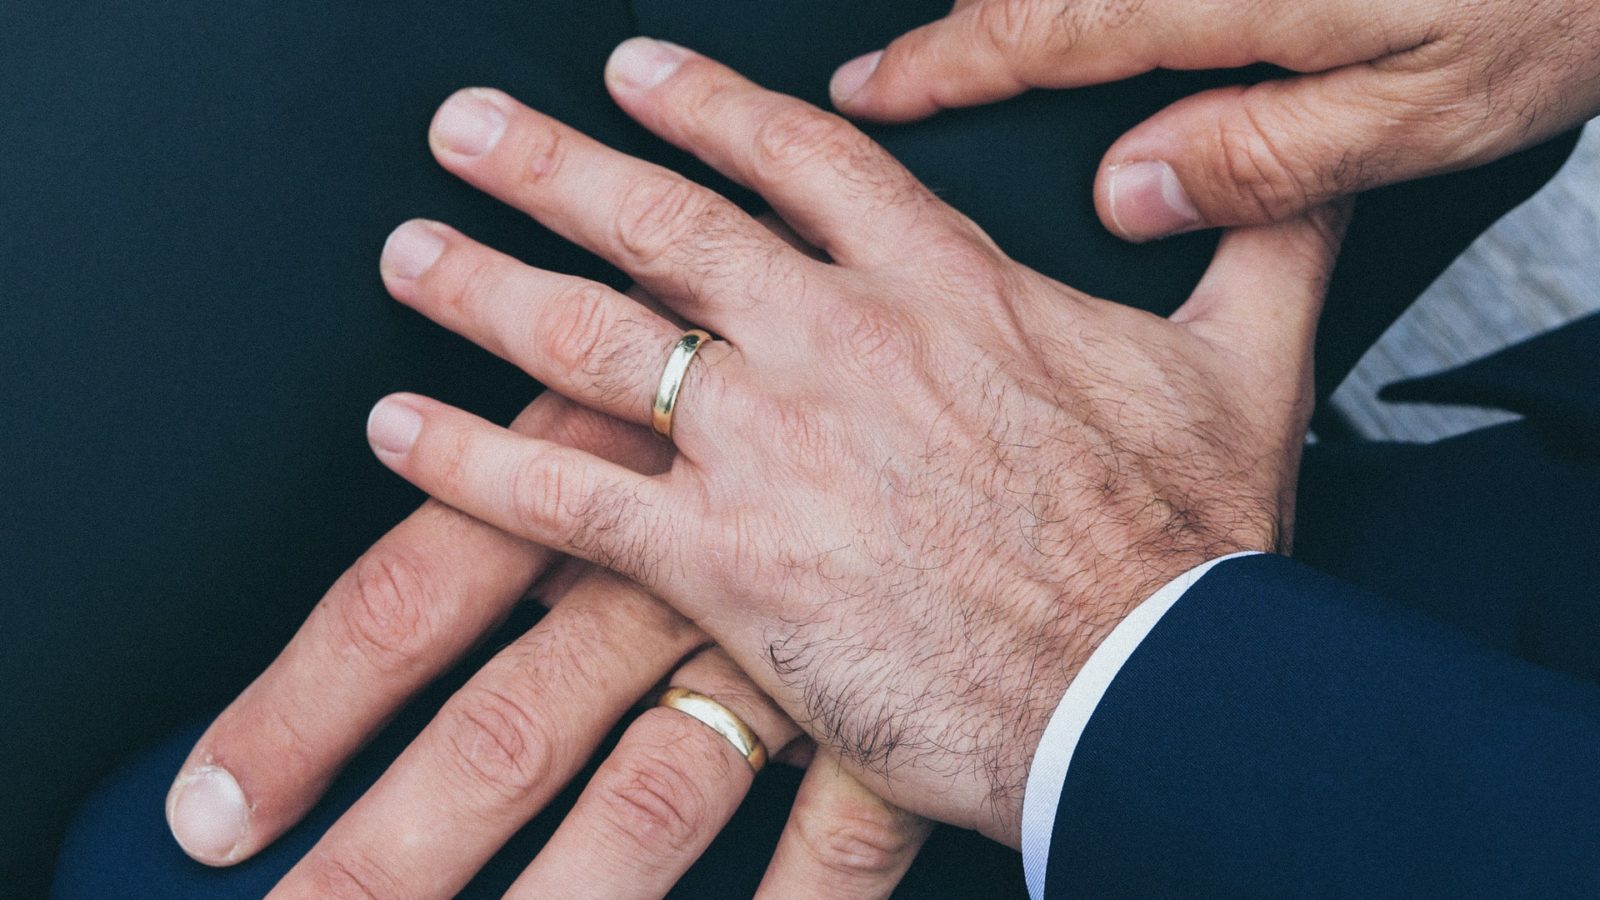 Two men's hands with wedding rings representing the laws governing same-sex divorce in Canada